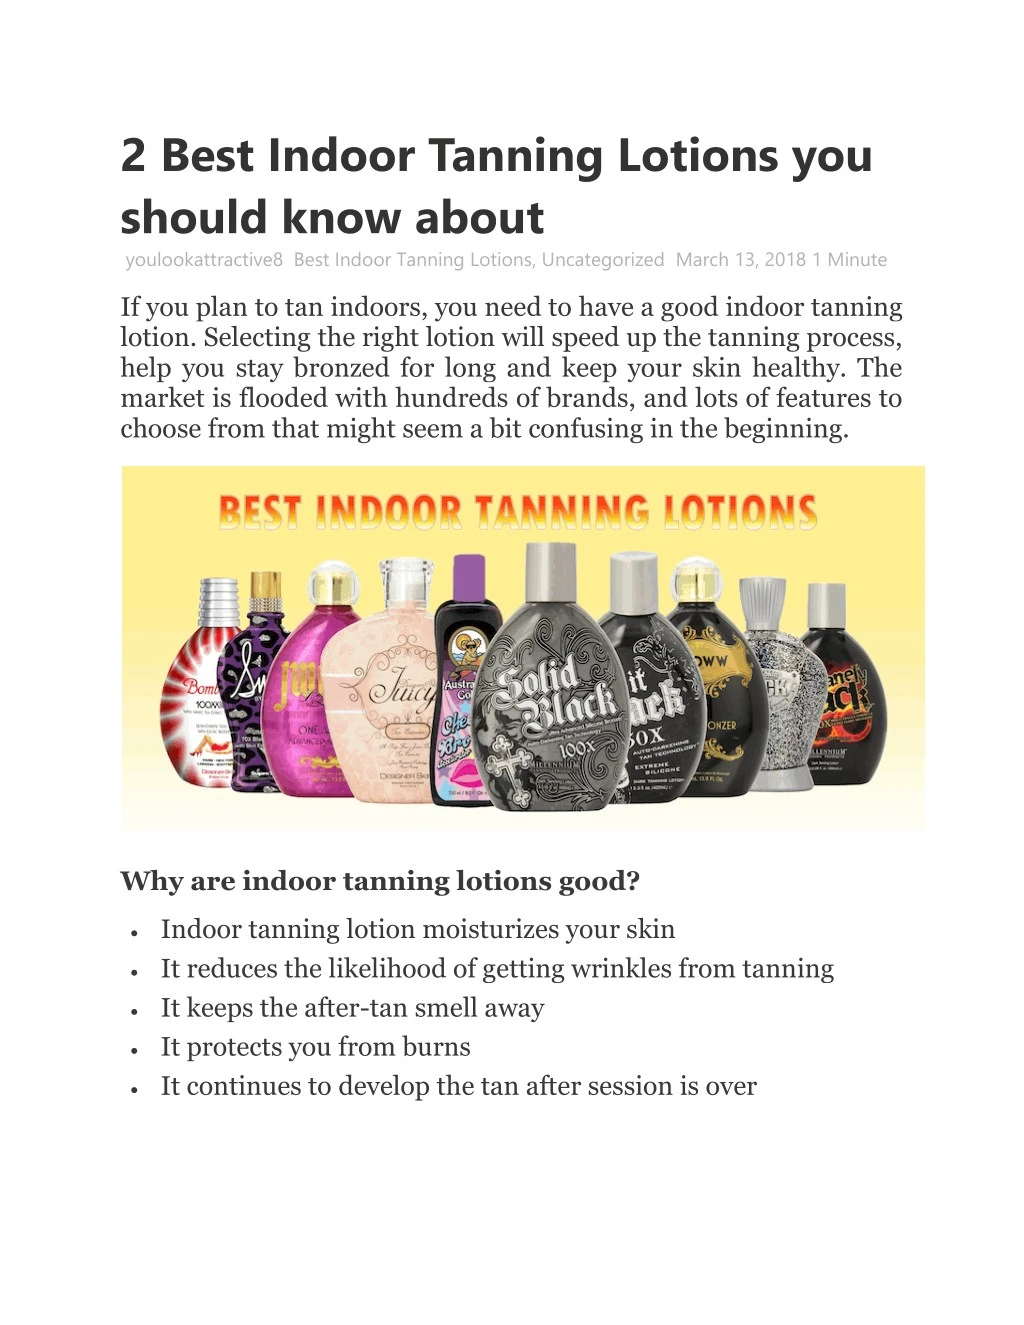 2 best indoor tanning lotions you should know